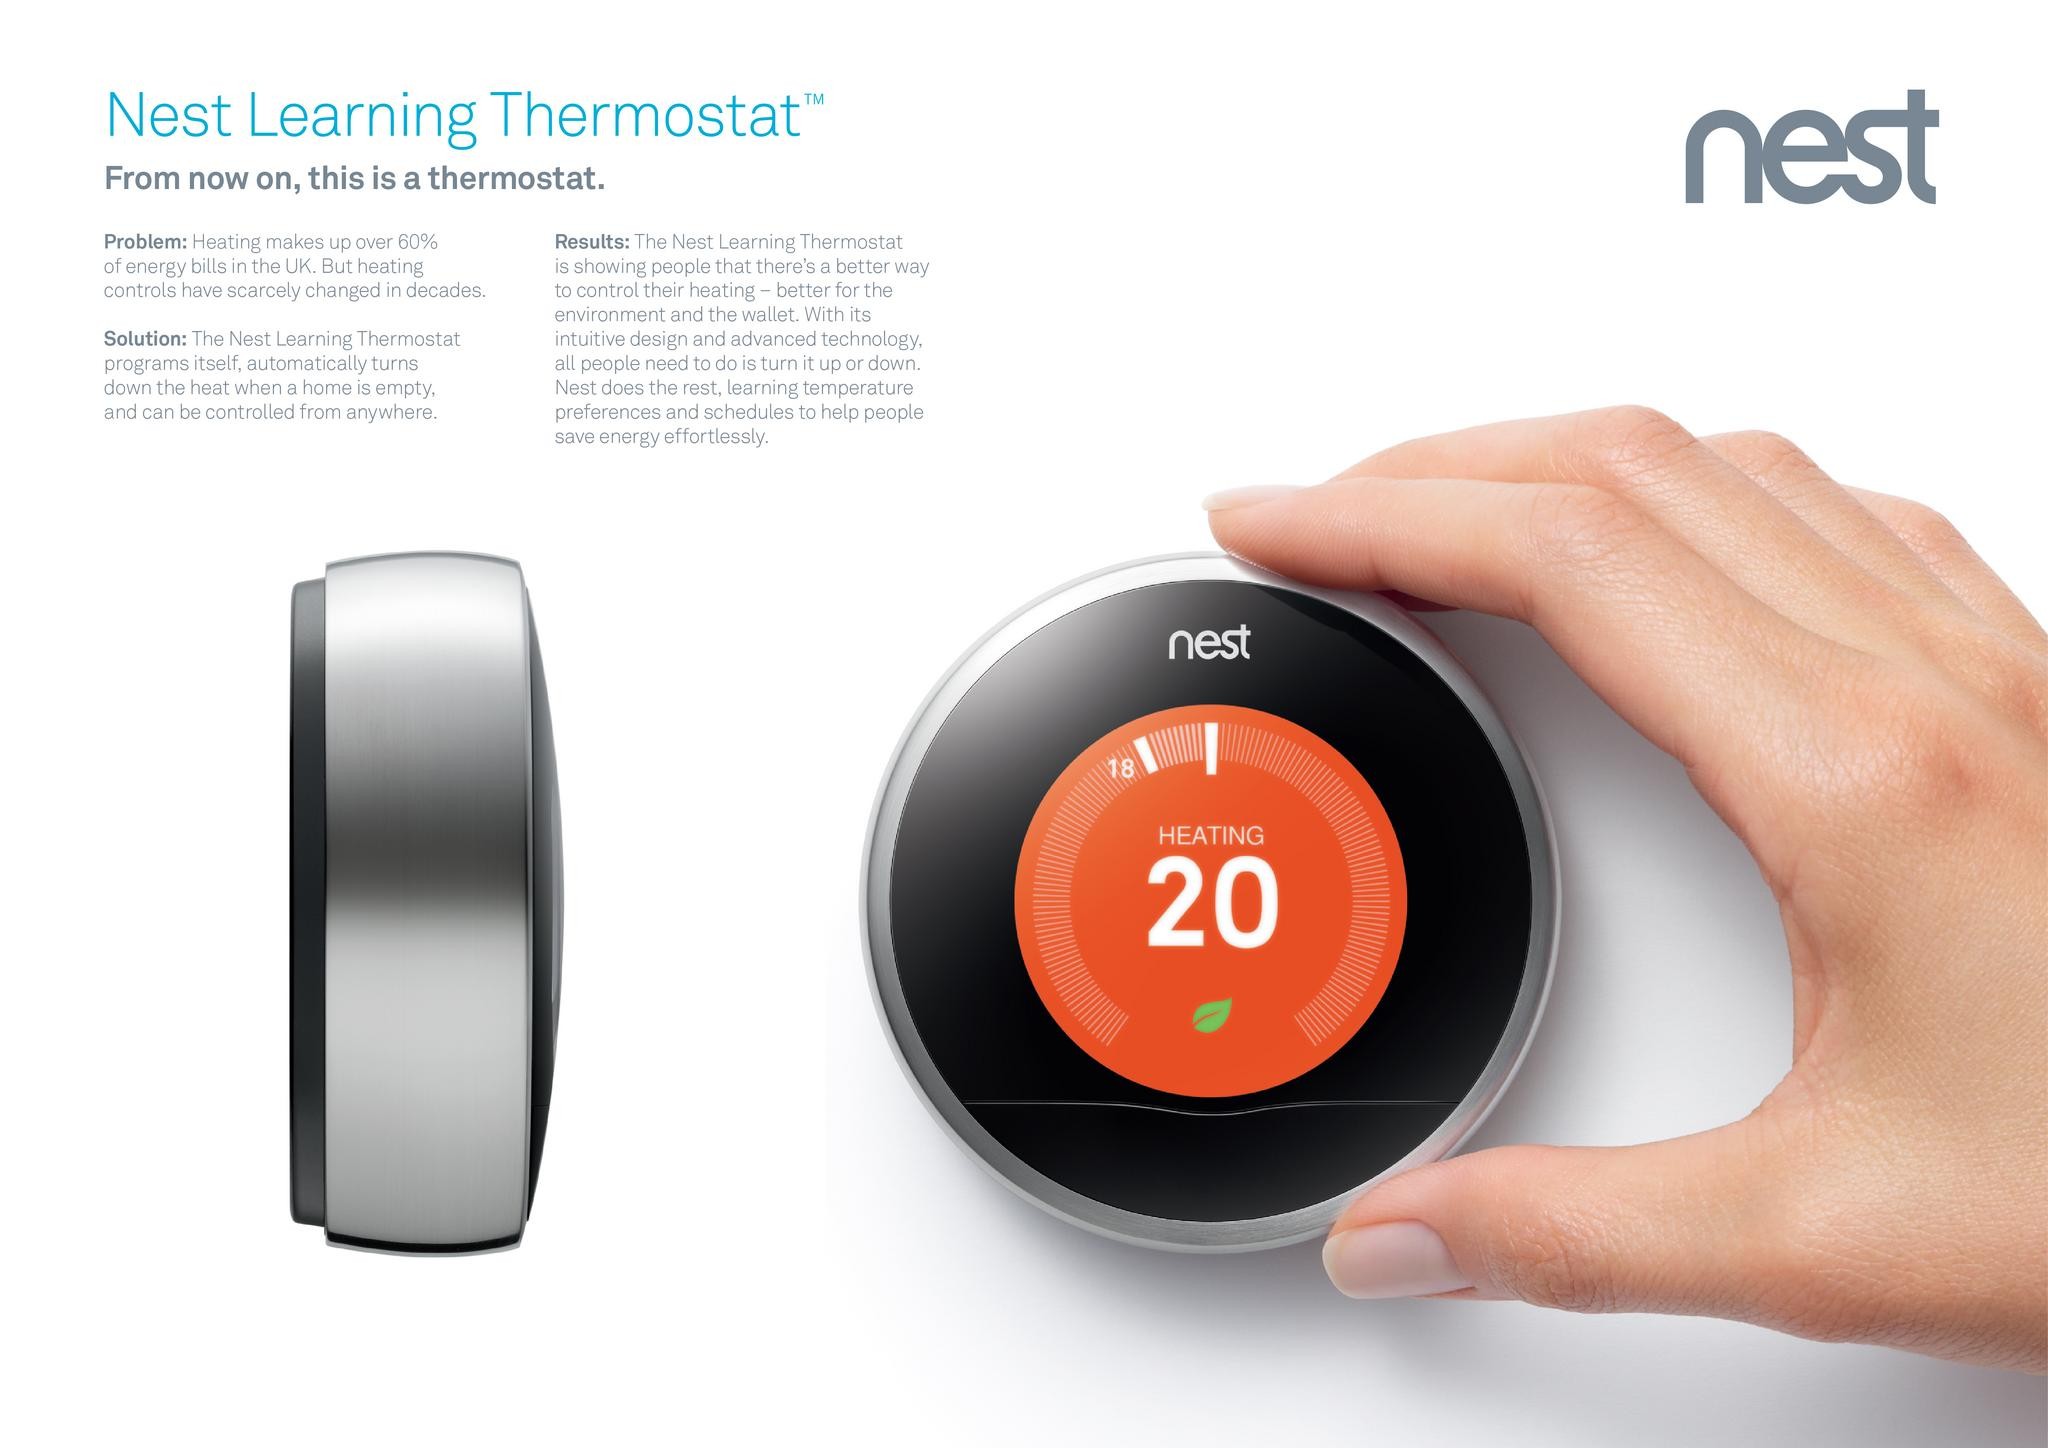 NEST LEARNING THERMOSTAT FOR THE UK